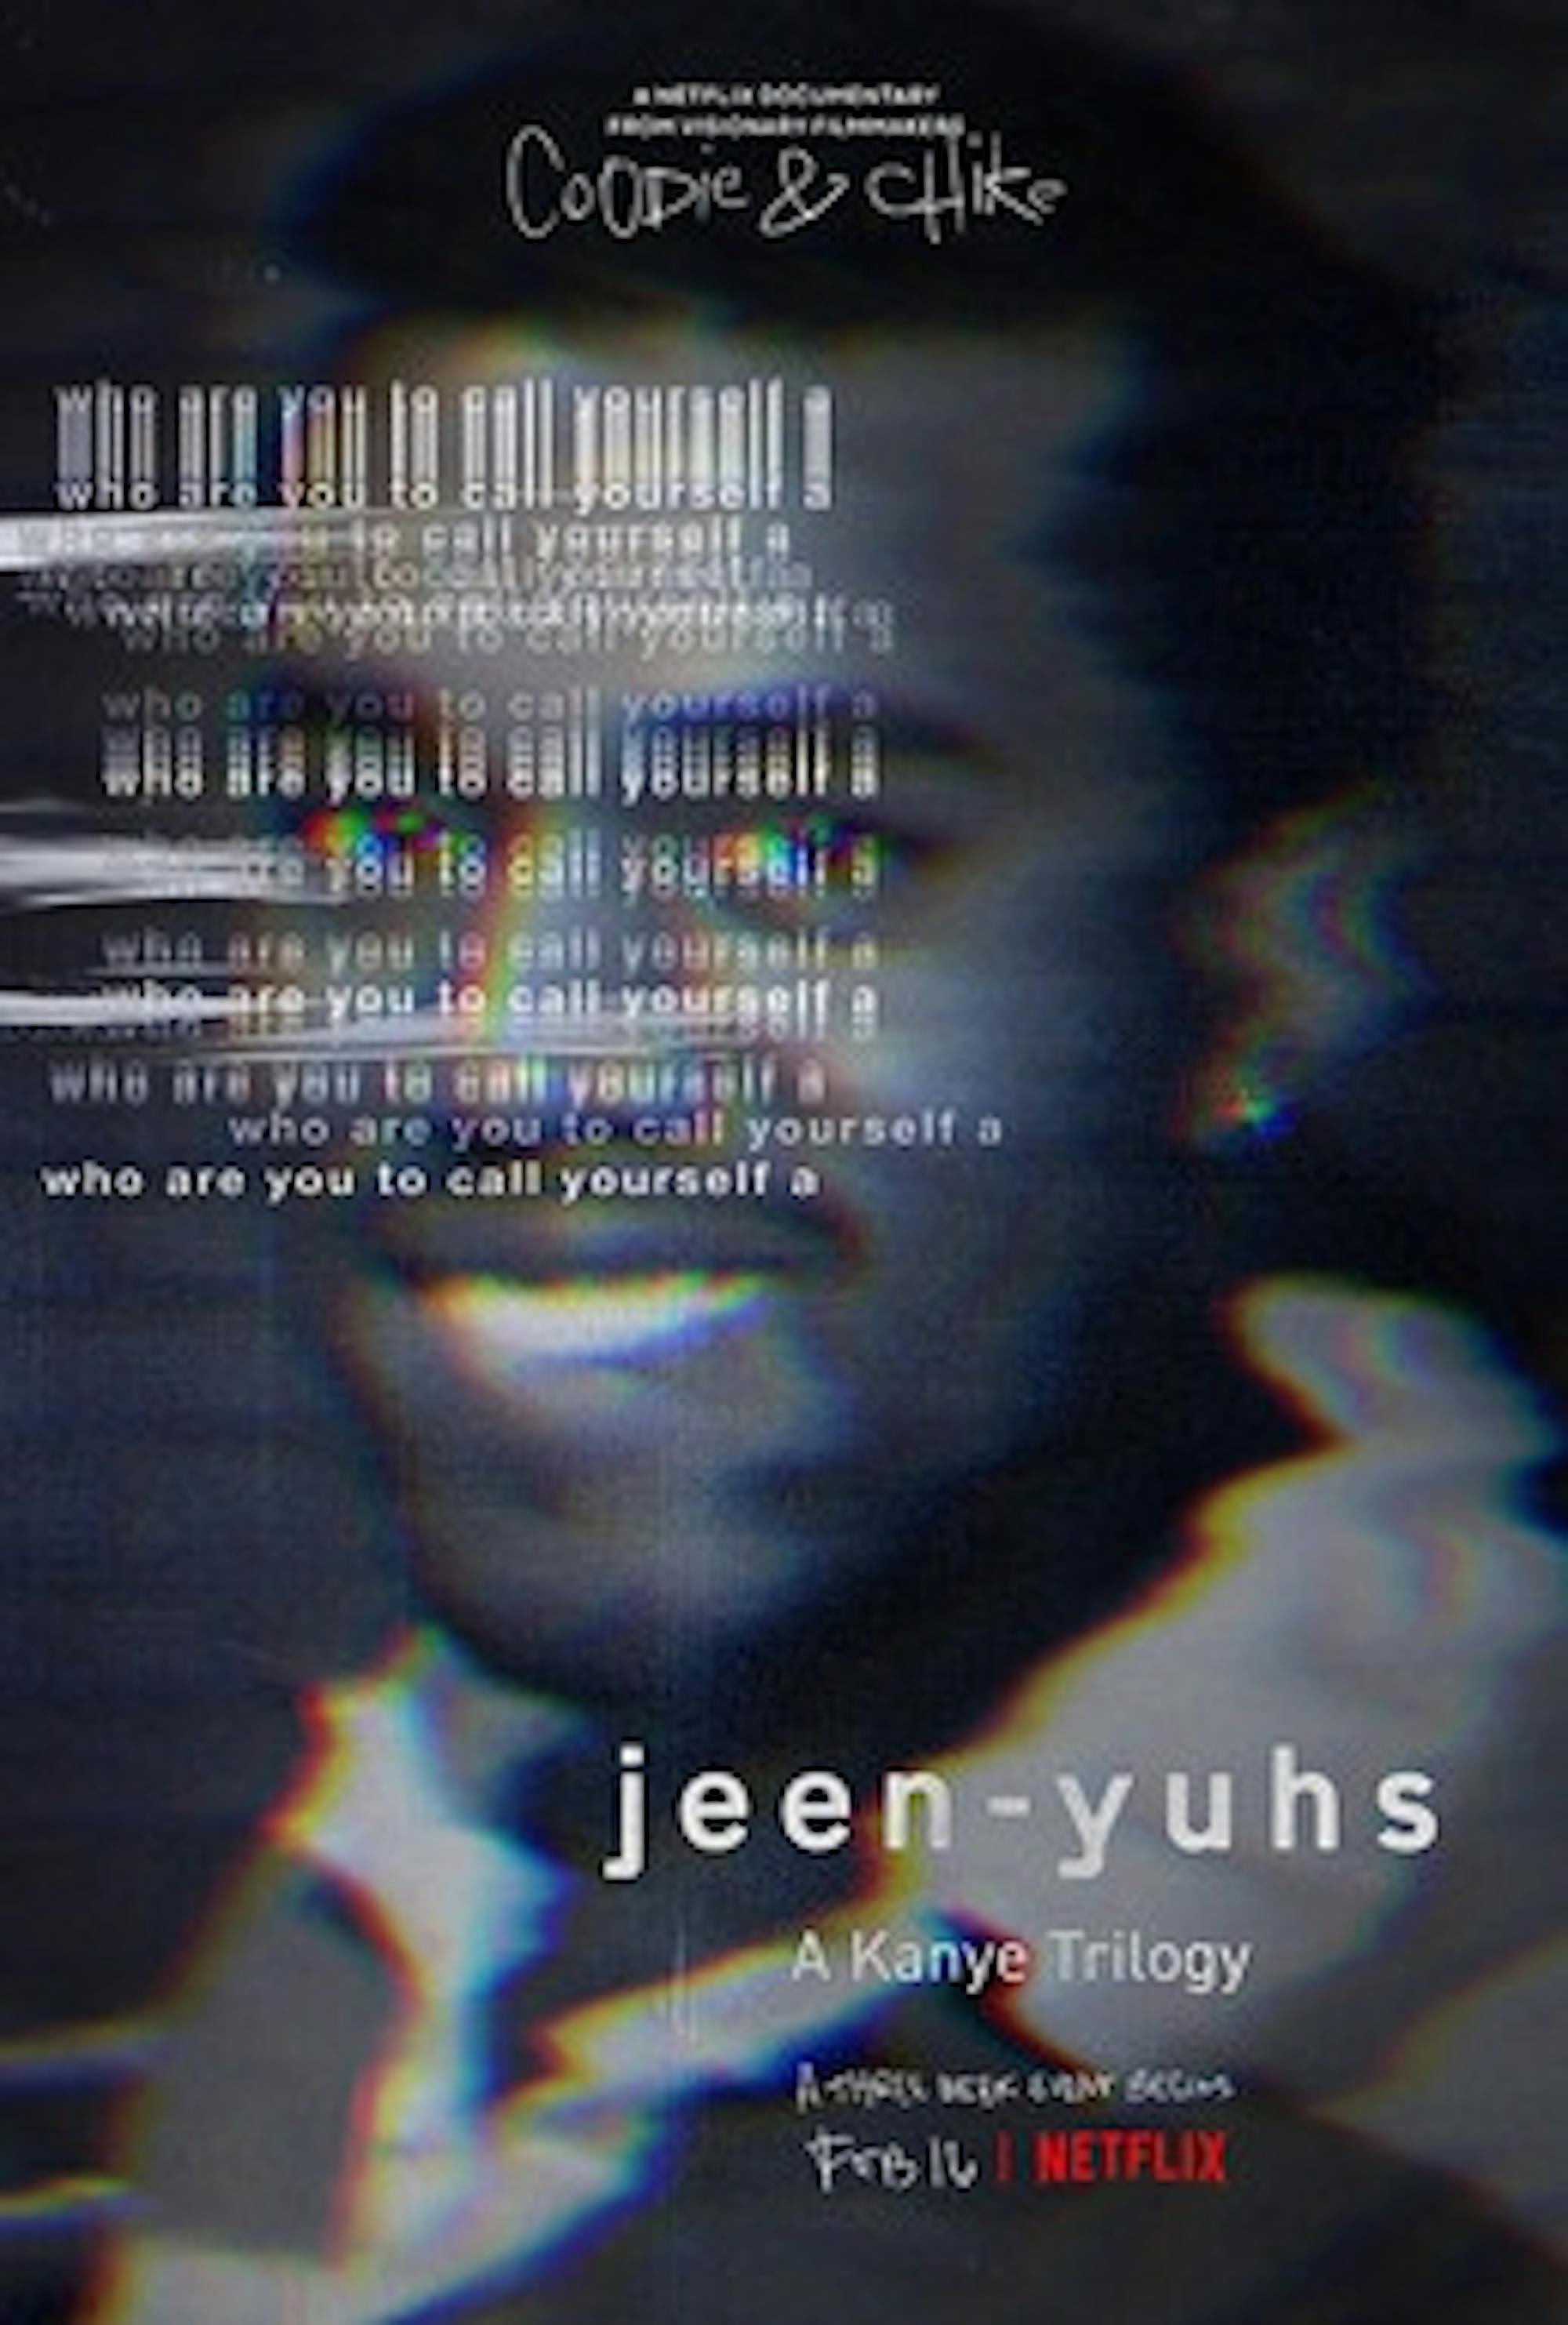 Mos Def & Kanye West Rap In Jeen-Yuhs Documentary First Look Clip